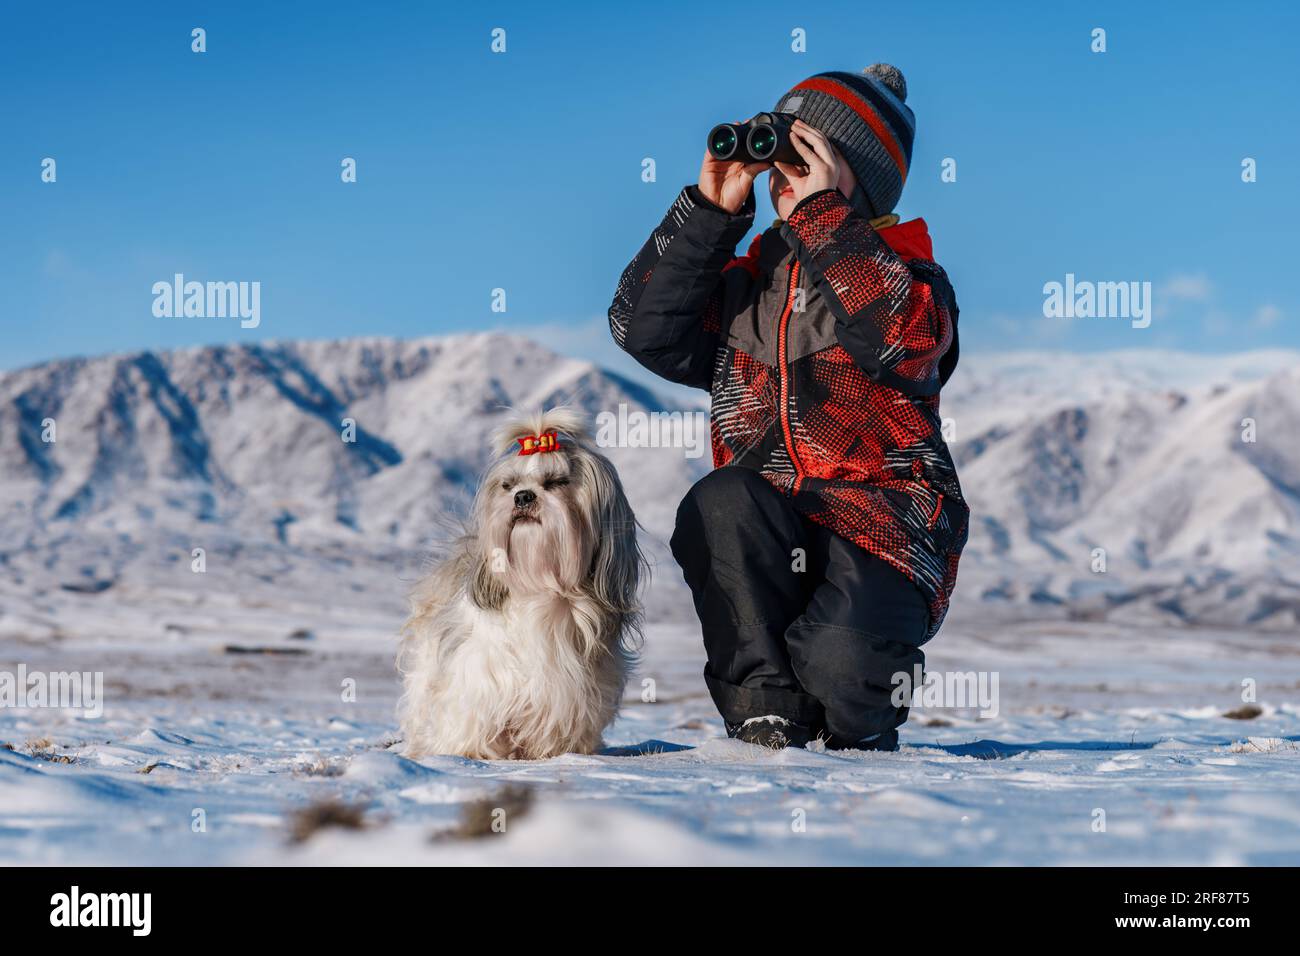 Child with binoculars and shih tzu dog posing on mountains background at winter Stock Photo